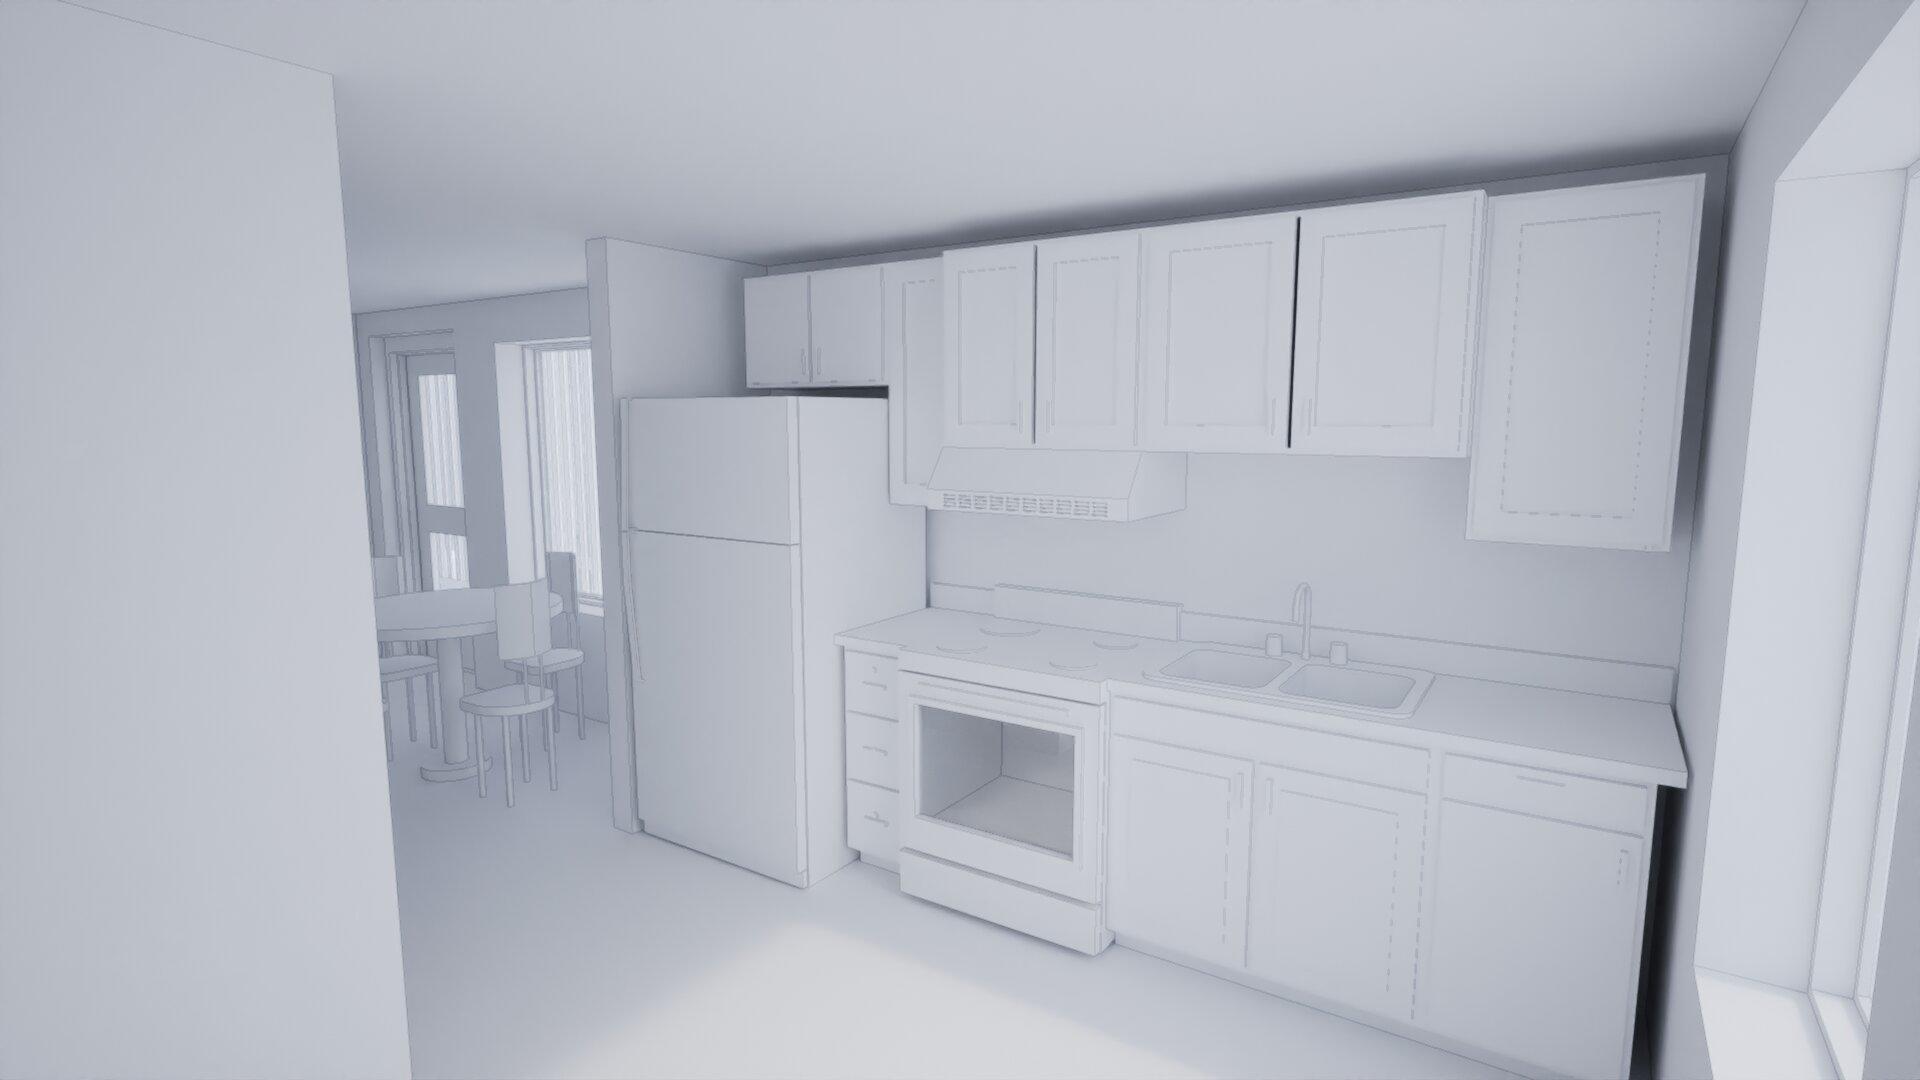 Interior perspective highlighting the integration of the small kitchen within a compact dwelling unit. 